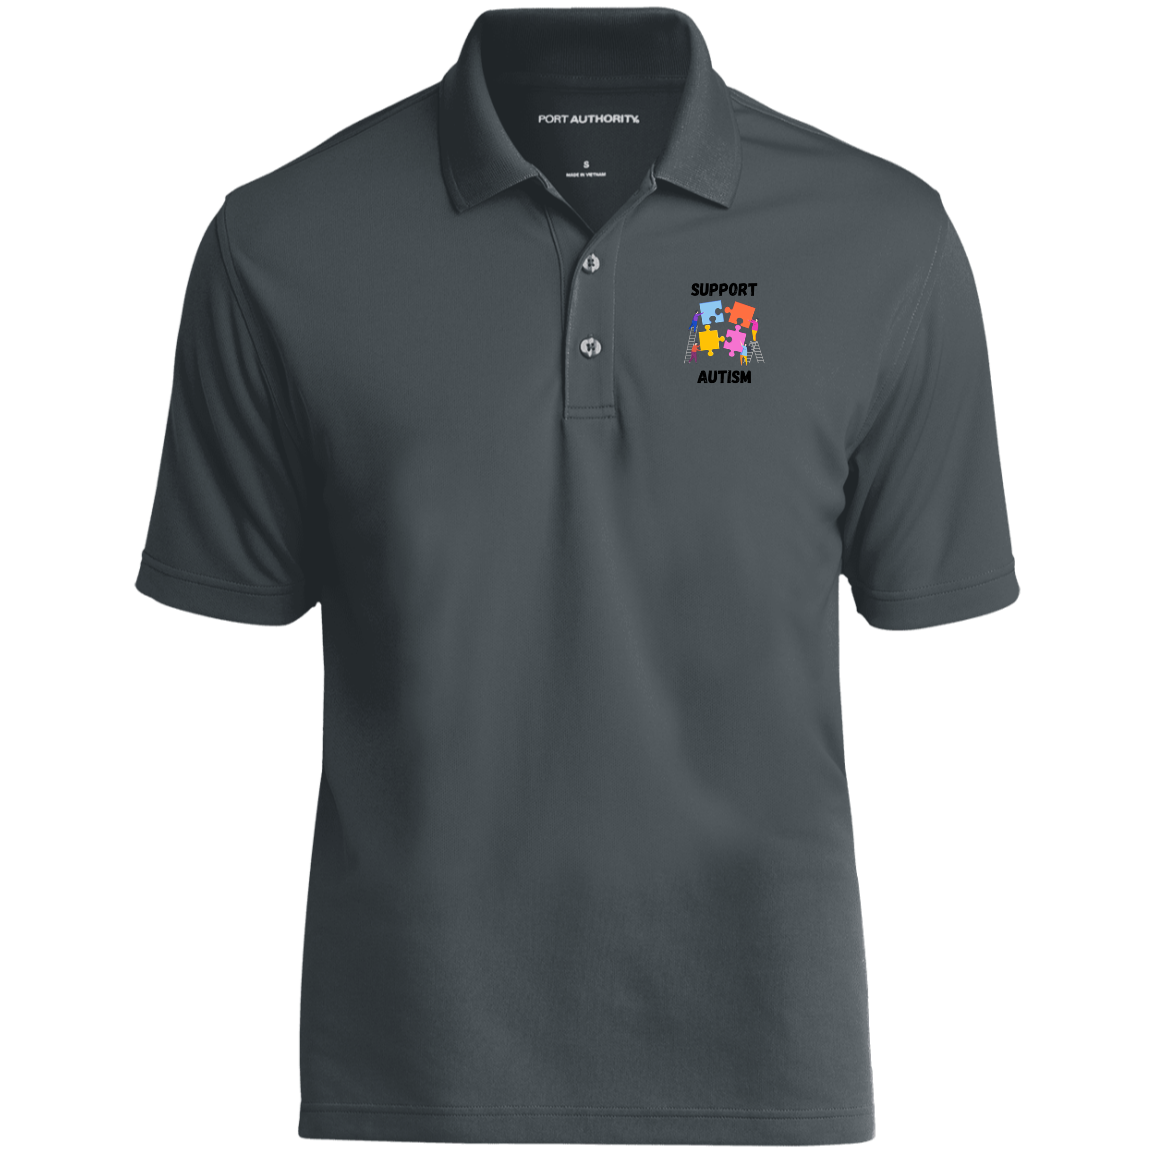 Support Autism Short Sleeve Polo